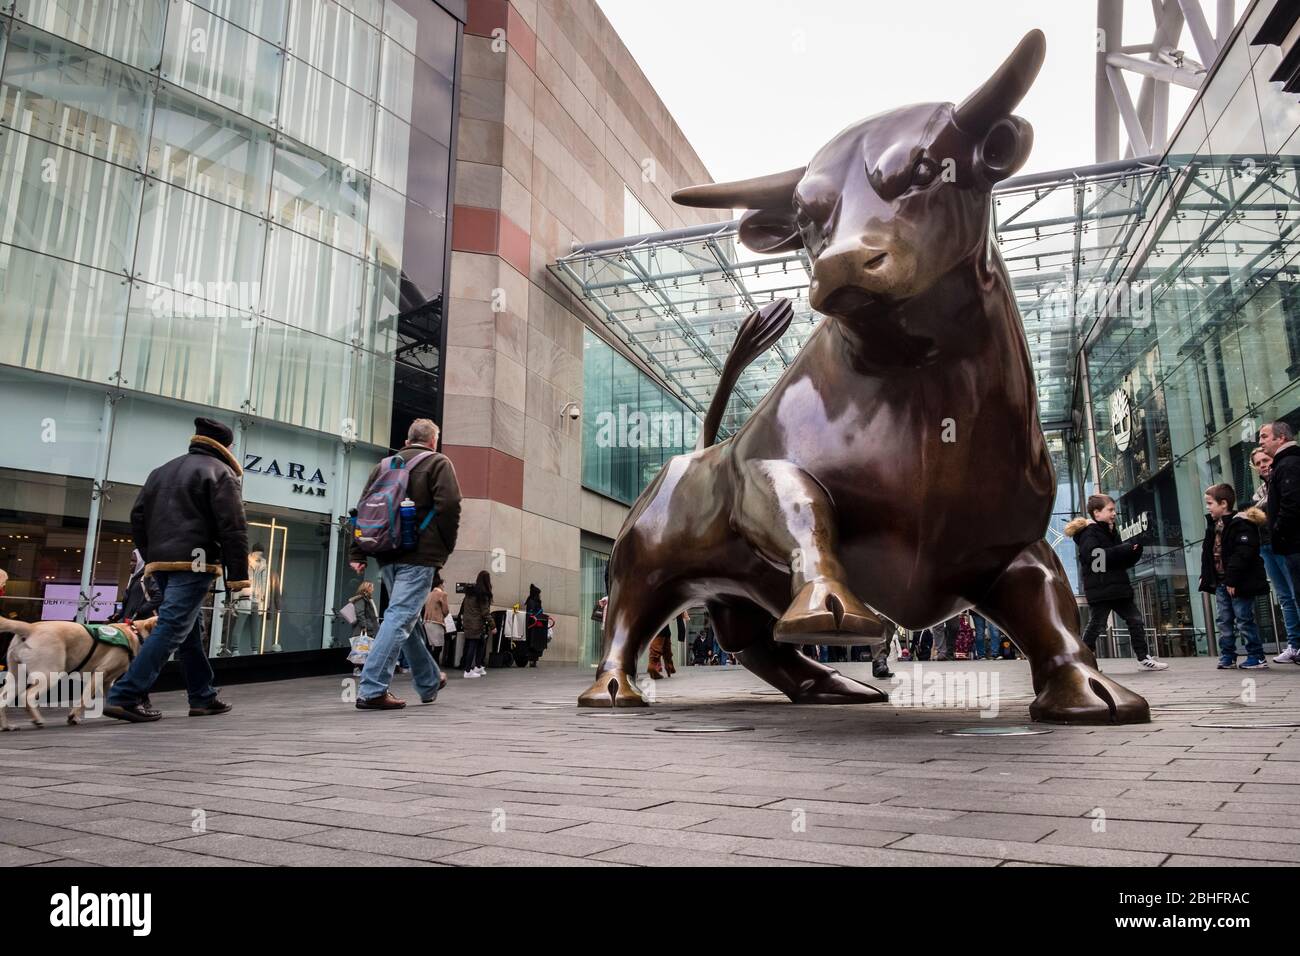 The Guardian - The Bull - bronze sculpture in the Bull Ring shopping centre, Birmingham Stock Photo